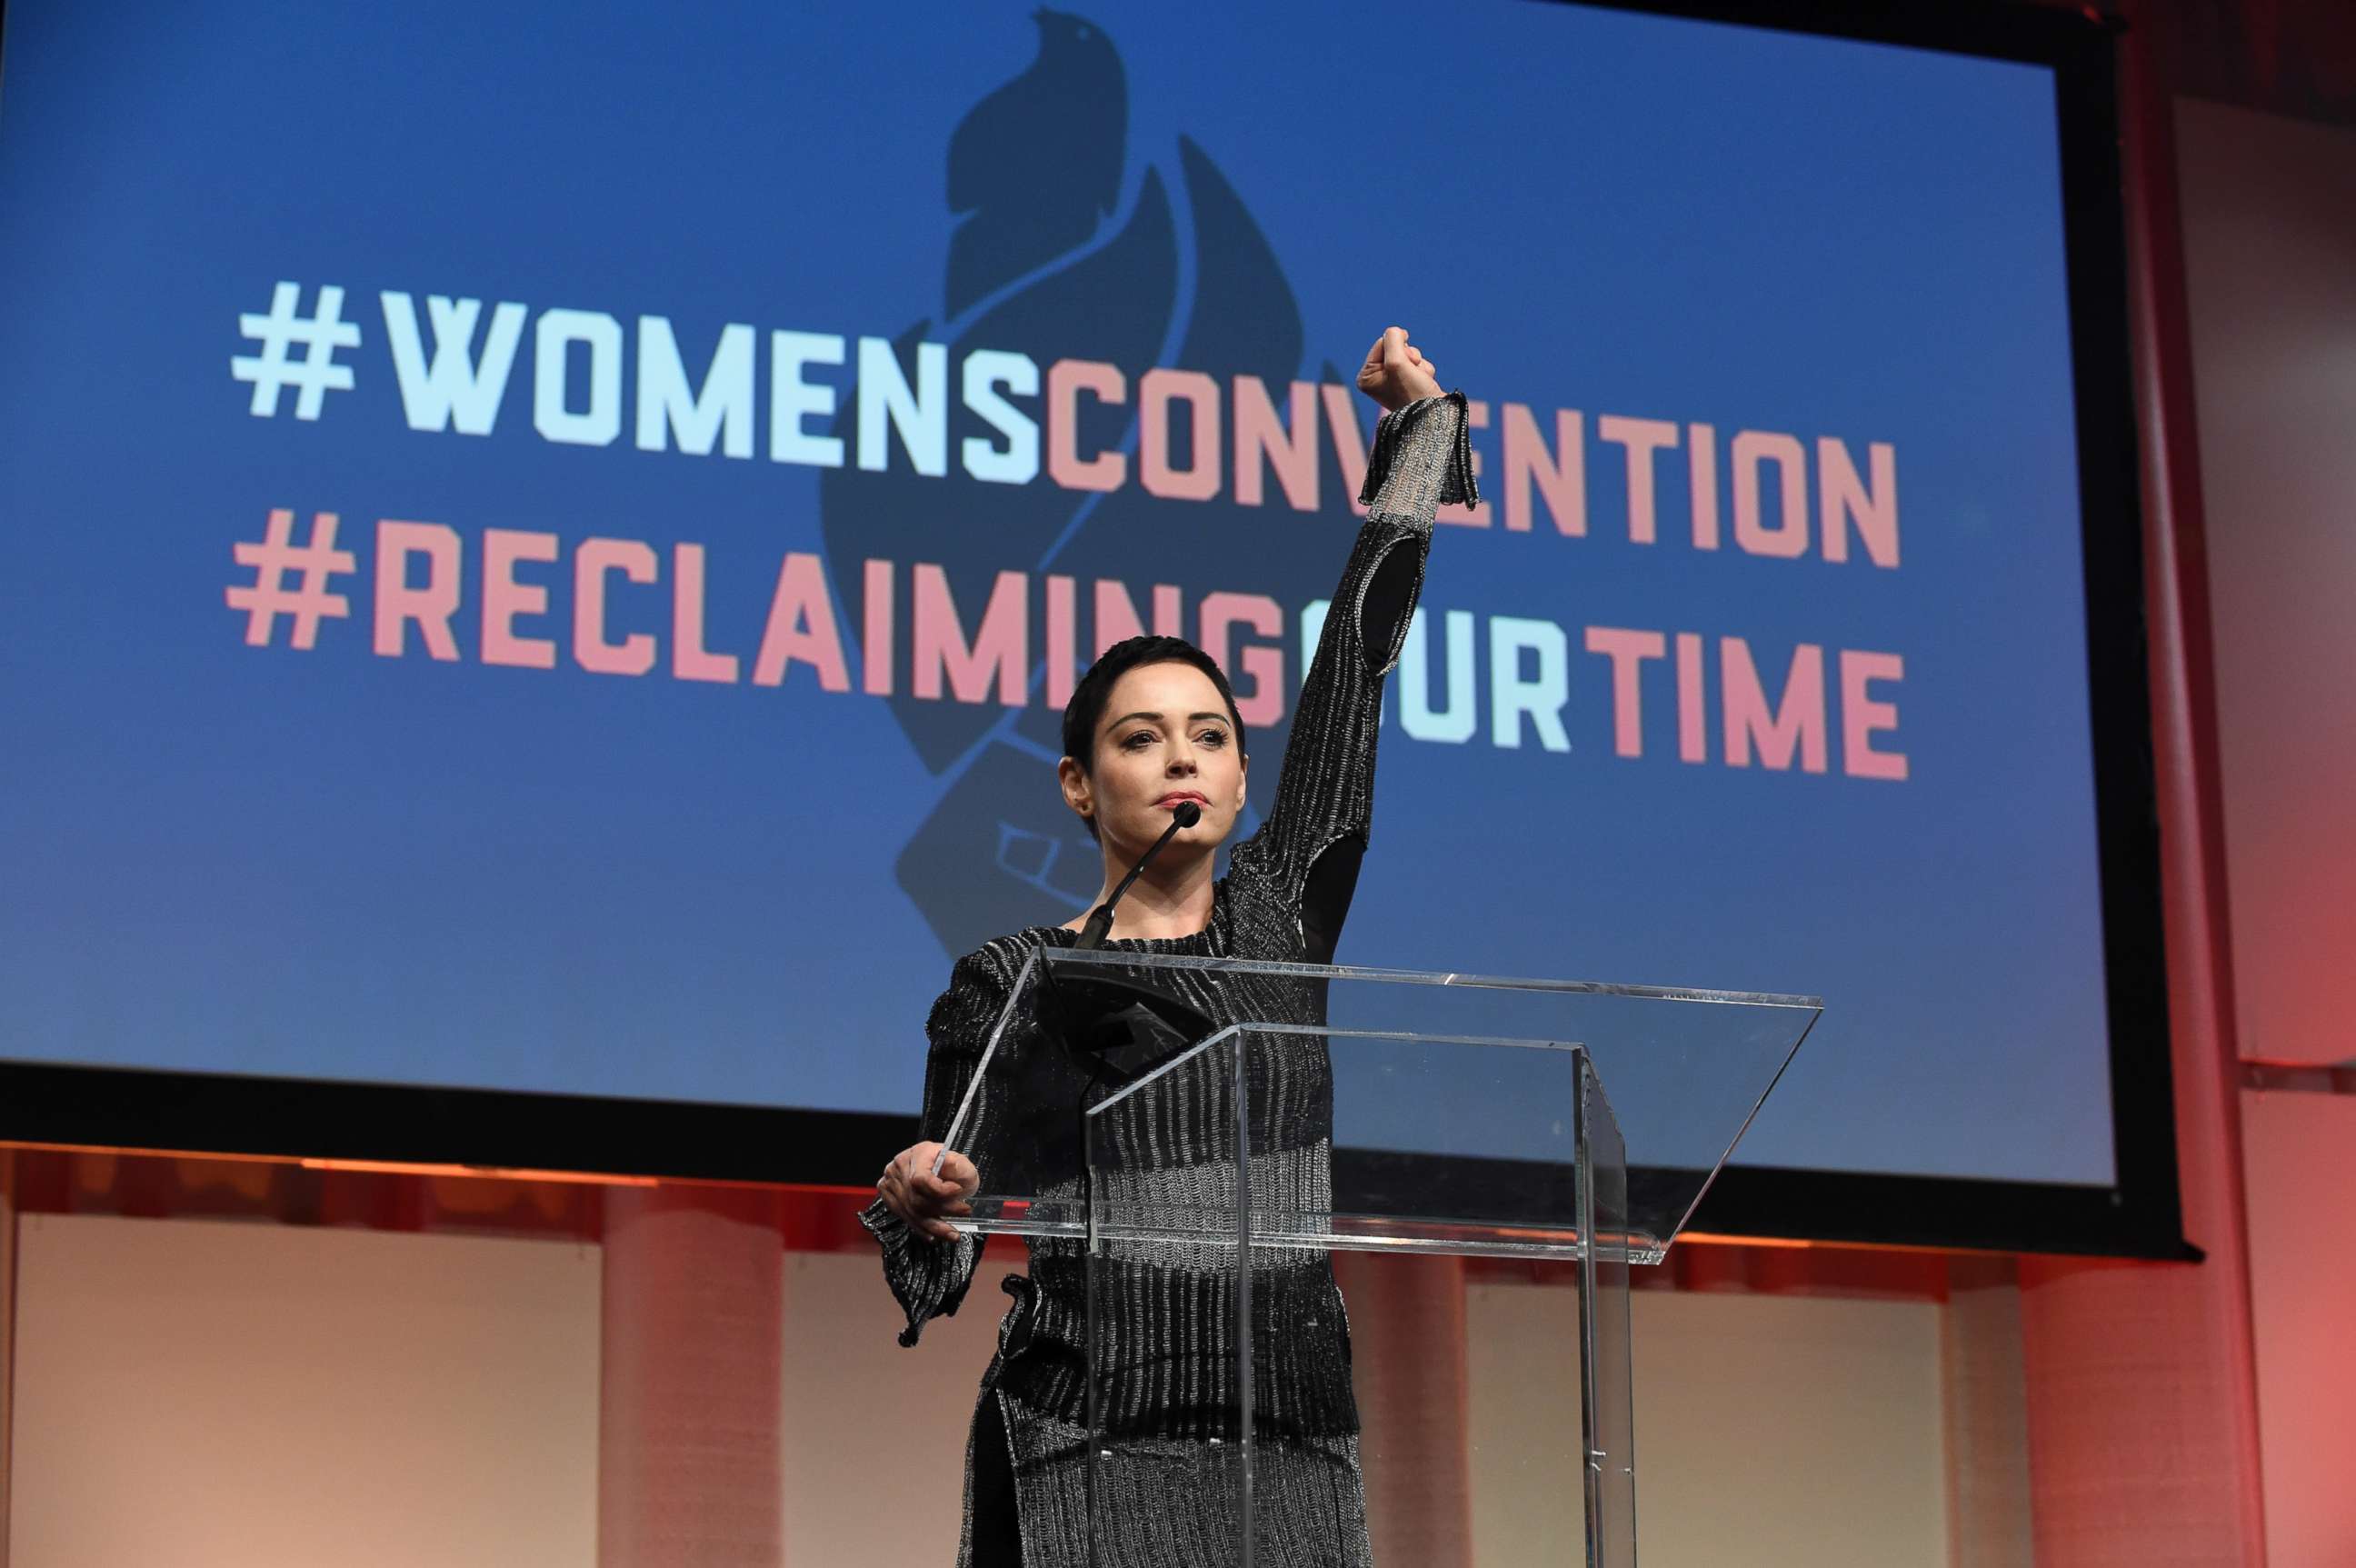 PHOTO: Actress Rose McGowan speaks as part of the Women's Convention at the Cobo Center in Detroit, Mich., Oct. 27, 2017.